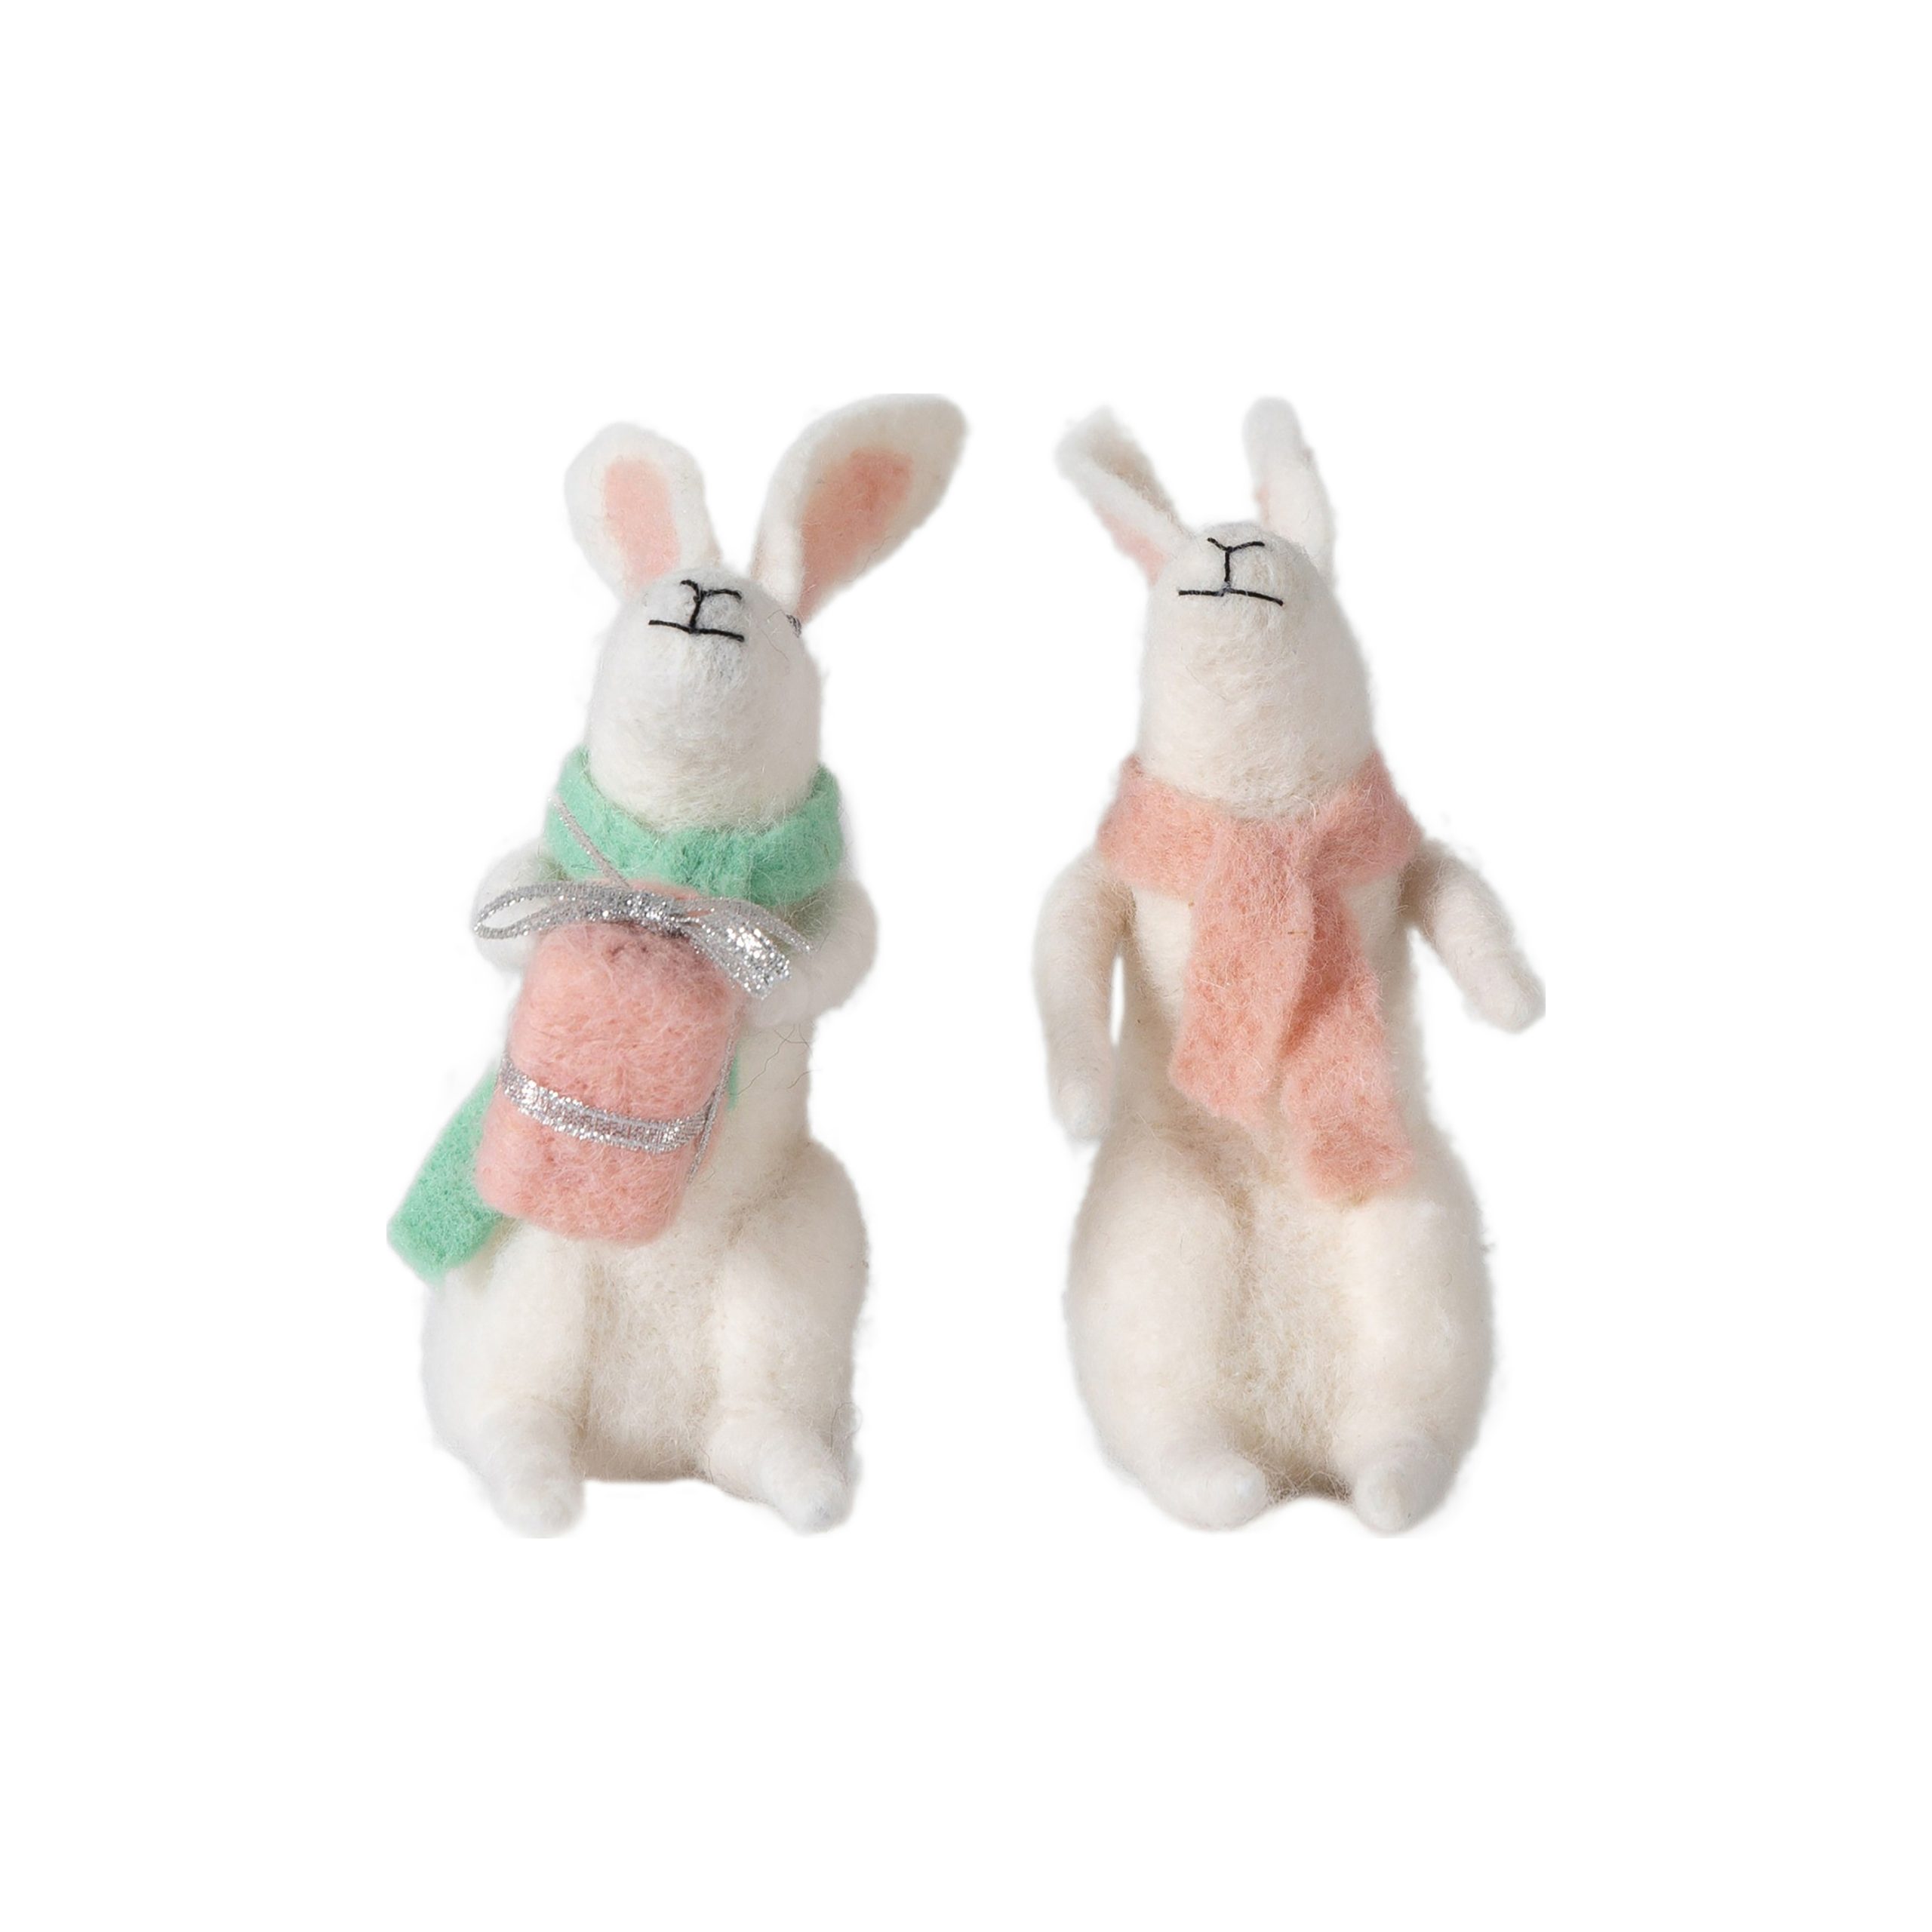 Gallery Direct Gifting Hares White (Set of 2)